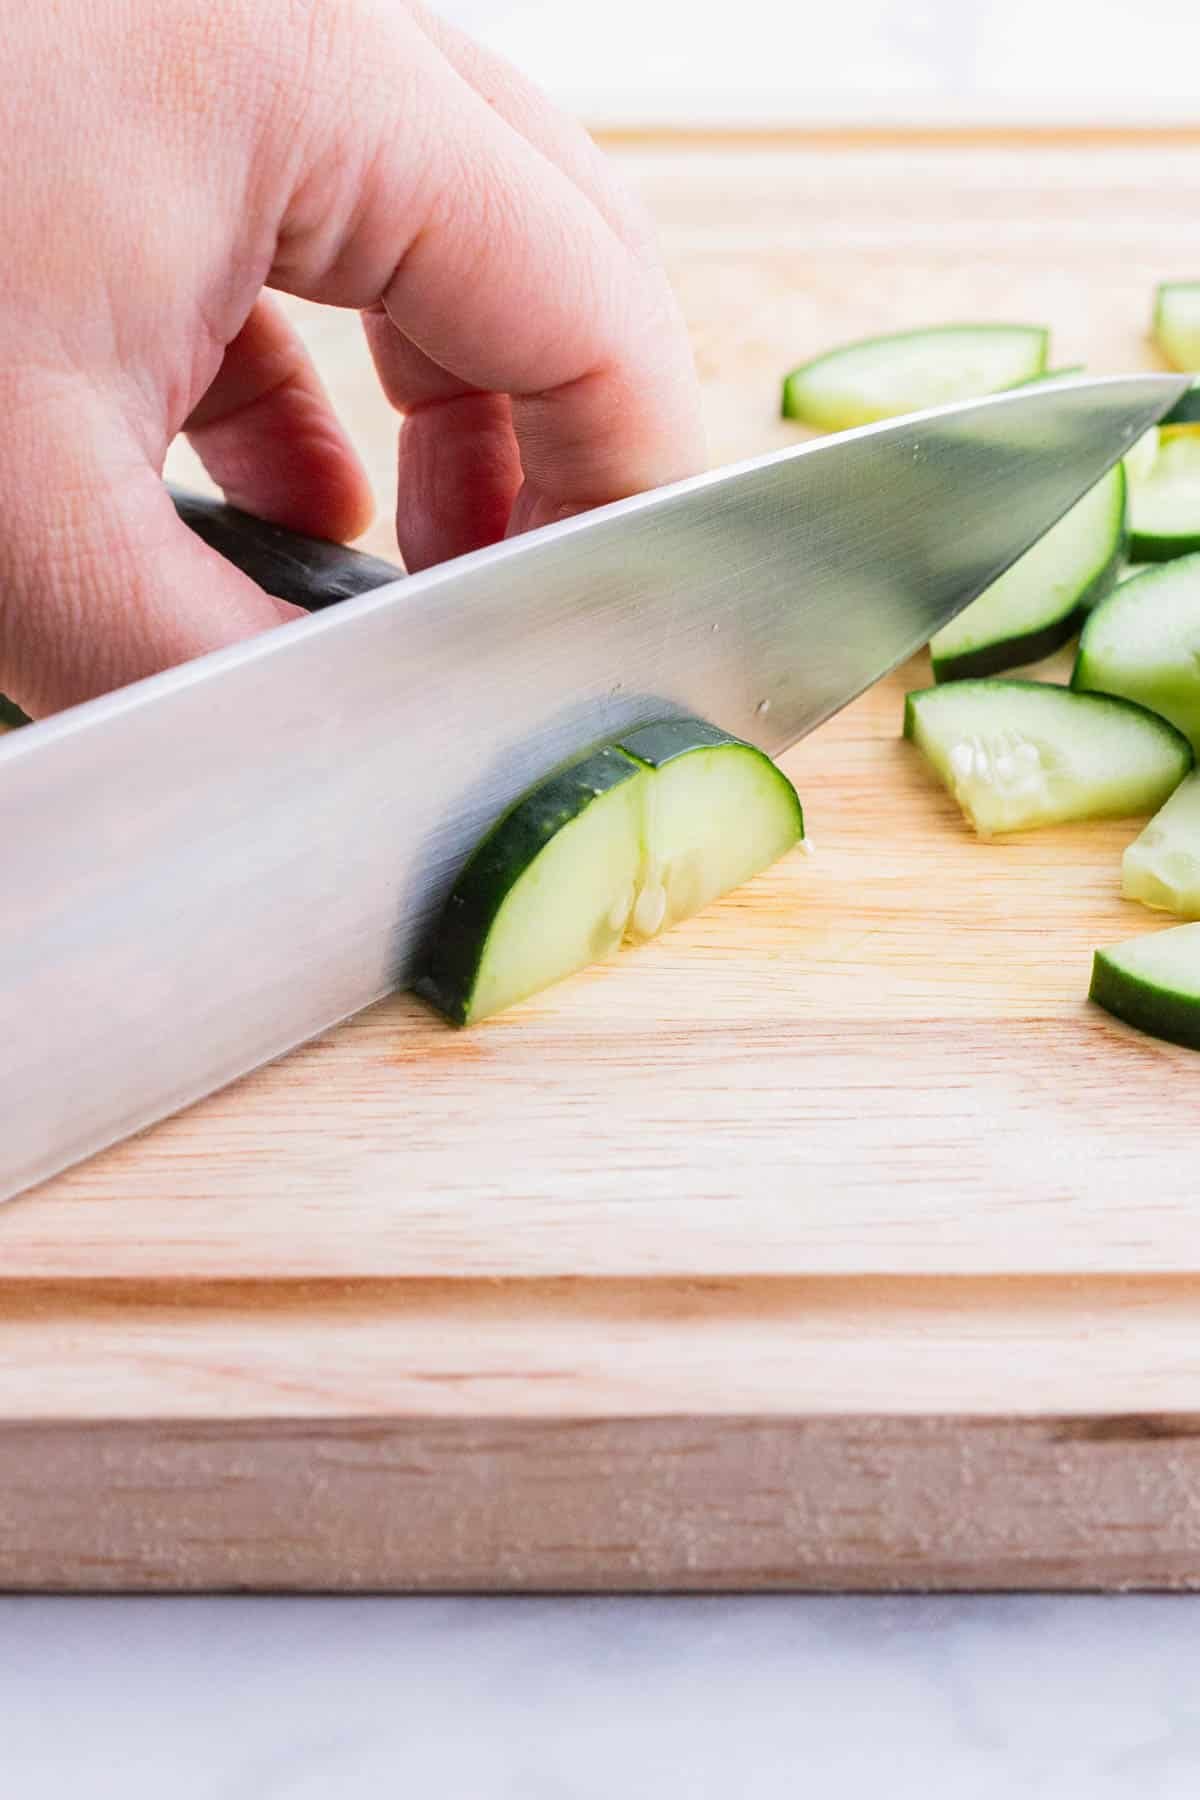 A half of a cucumber is sliced into half-moons.